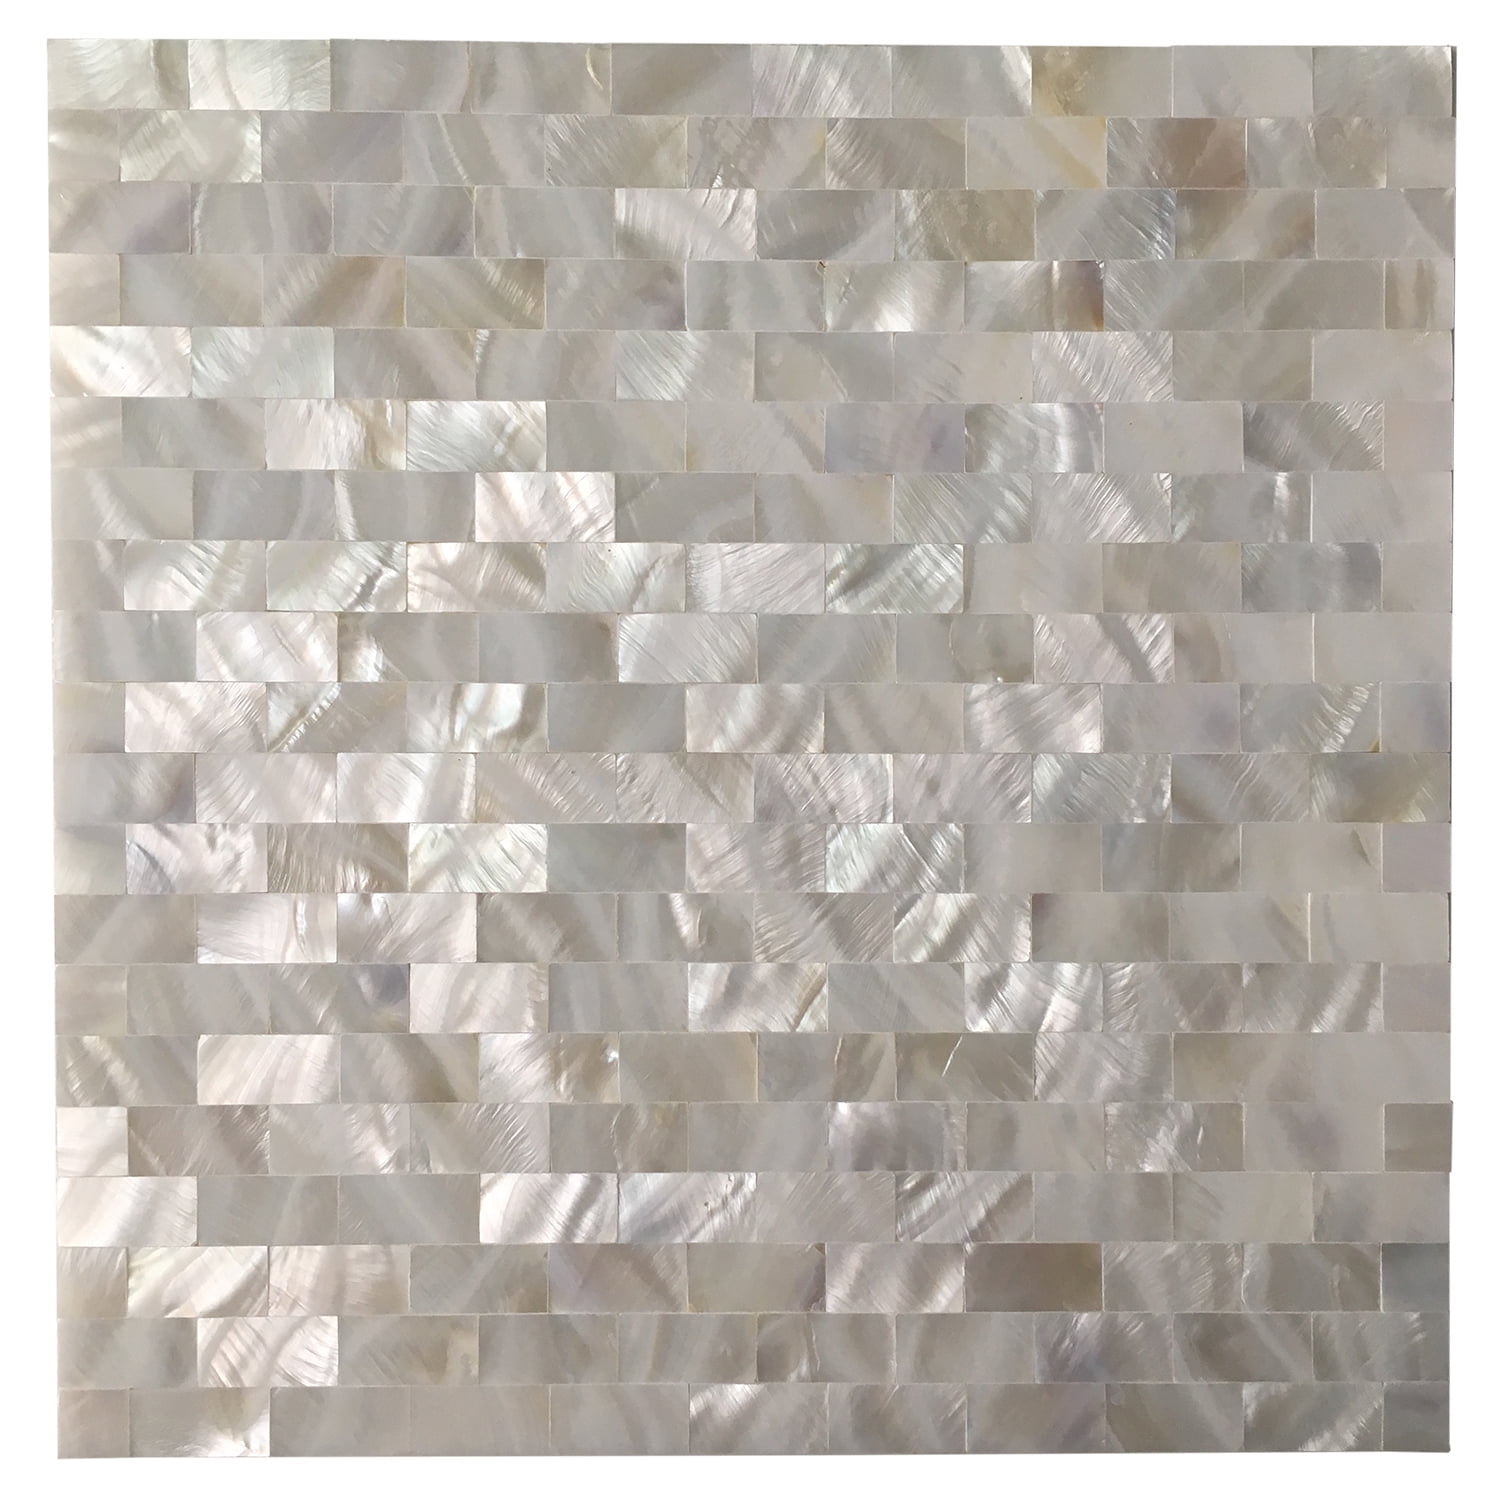 L And Stick Mother Of Pearl Tile, Mother Of Pearl Mosaic Tile